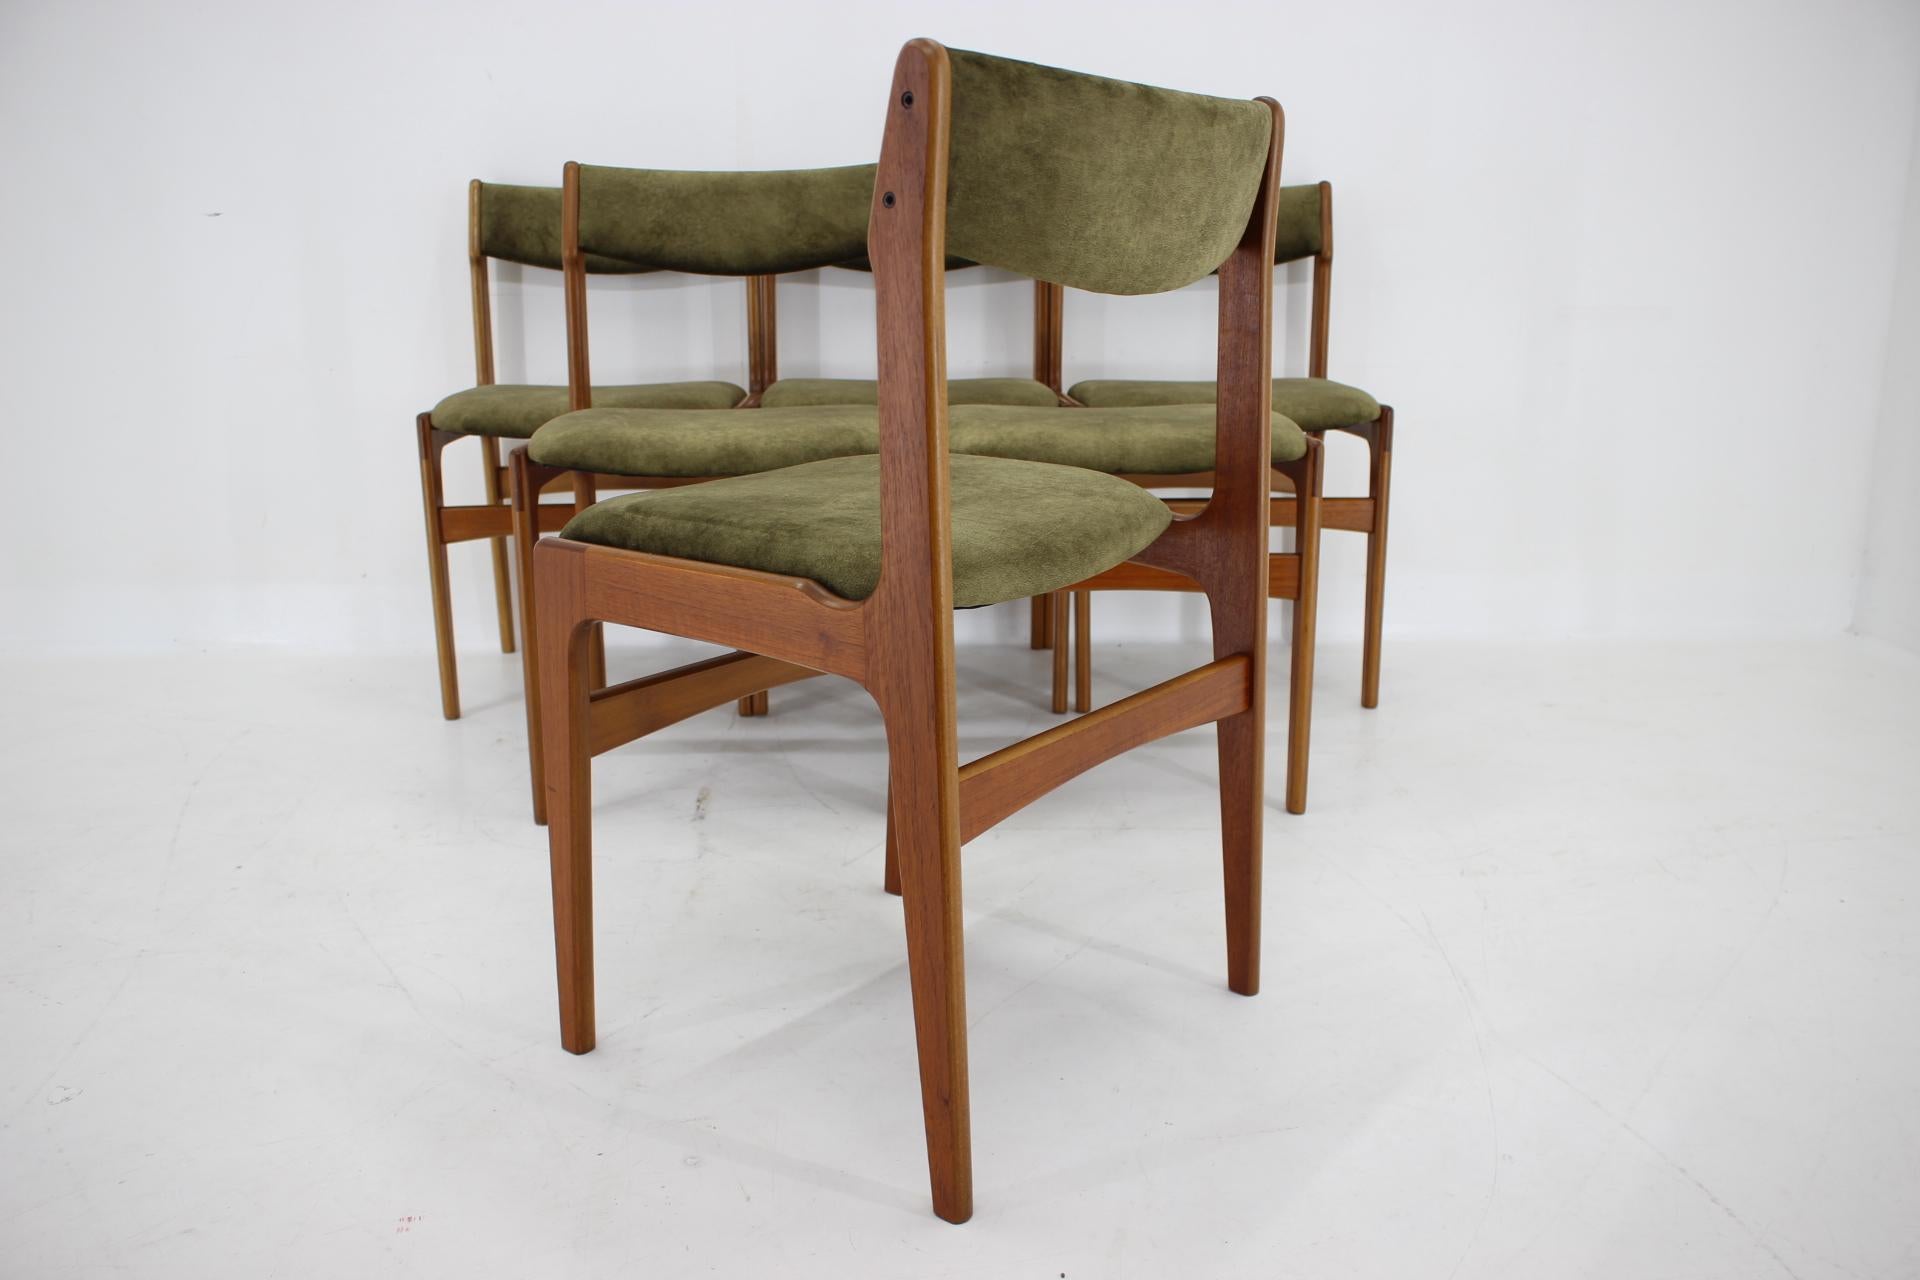 1960s Danish Teak Dining Chairs, Set of 6 For Sale 3